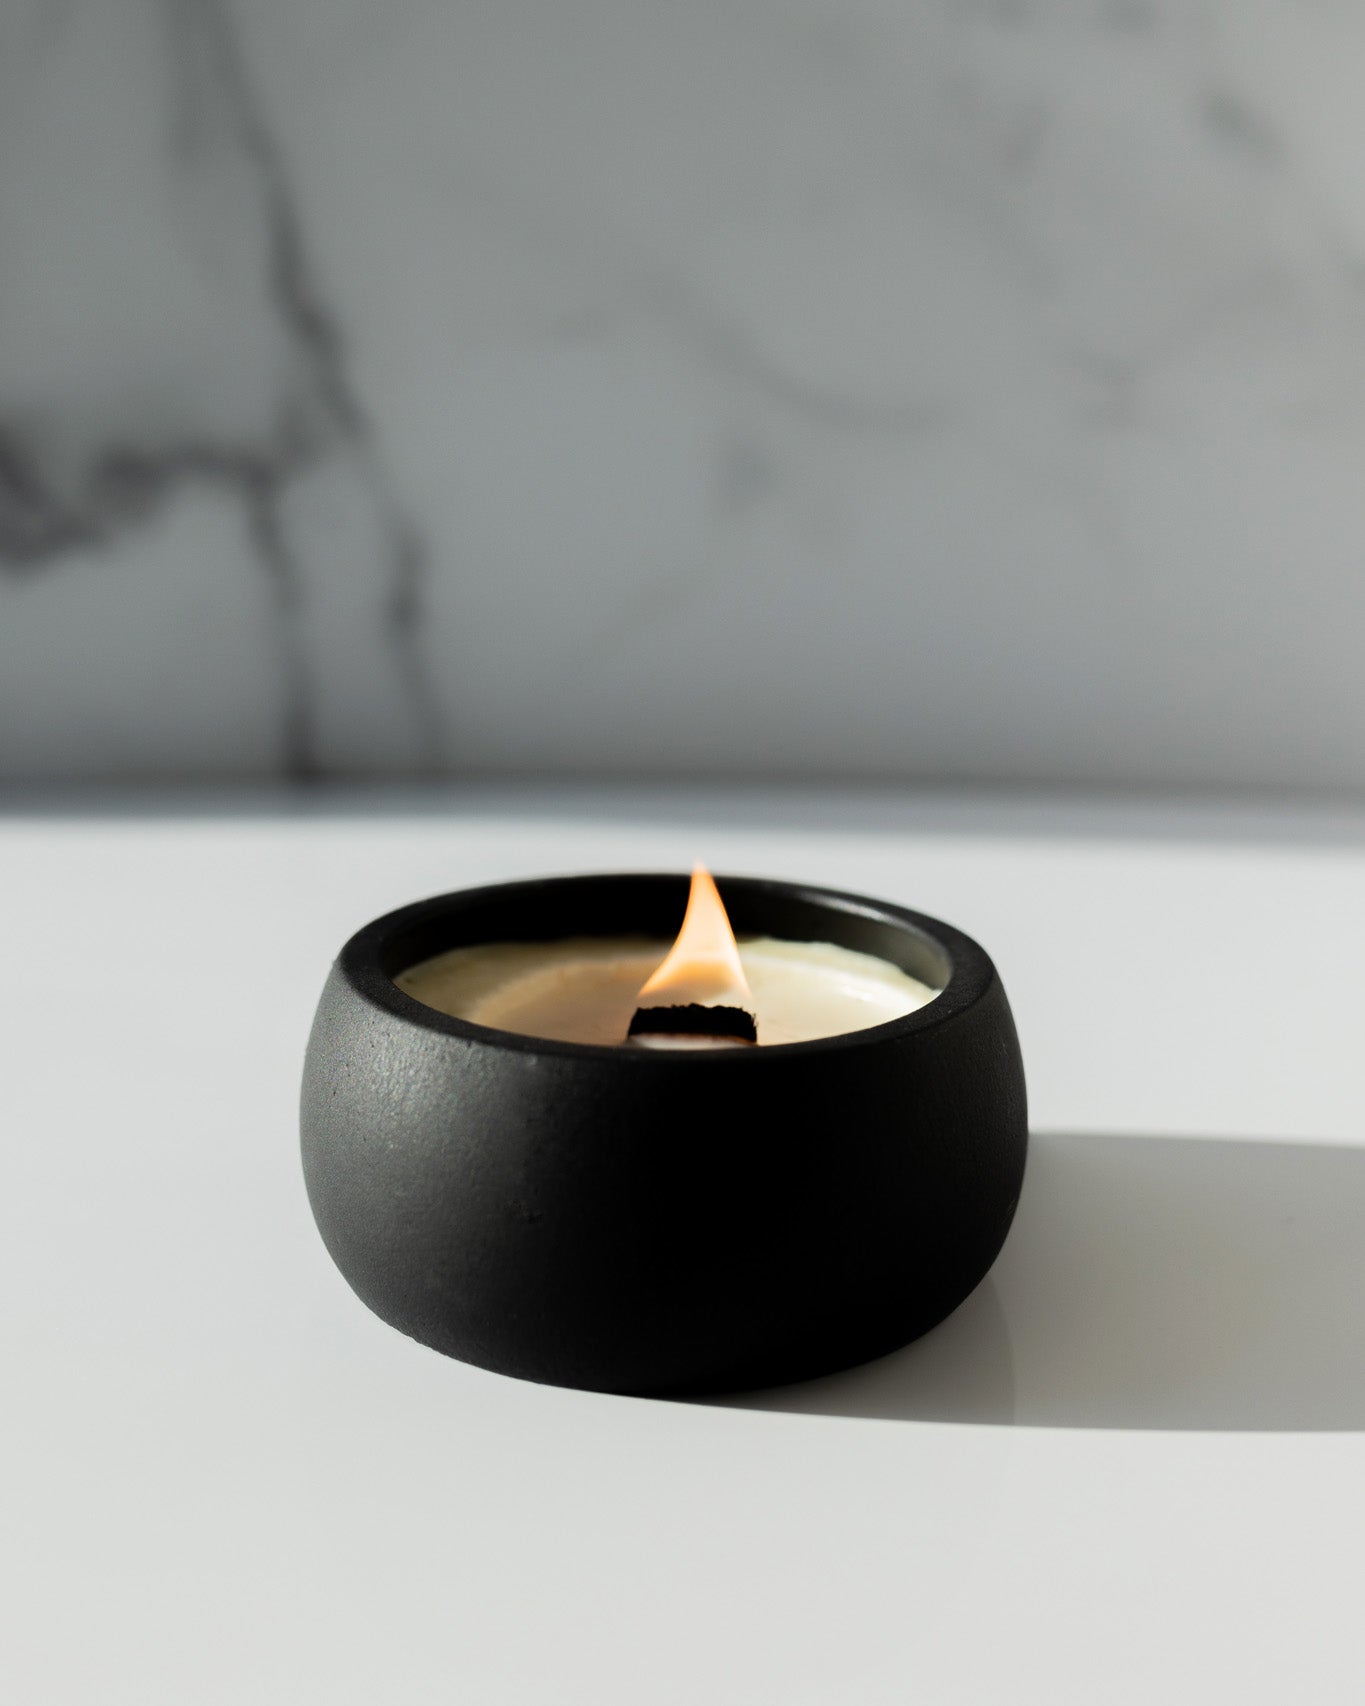 Spruce It Up Coconut Soy Candle - Black Concrete Wooden Wick Vessel